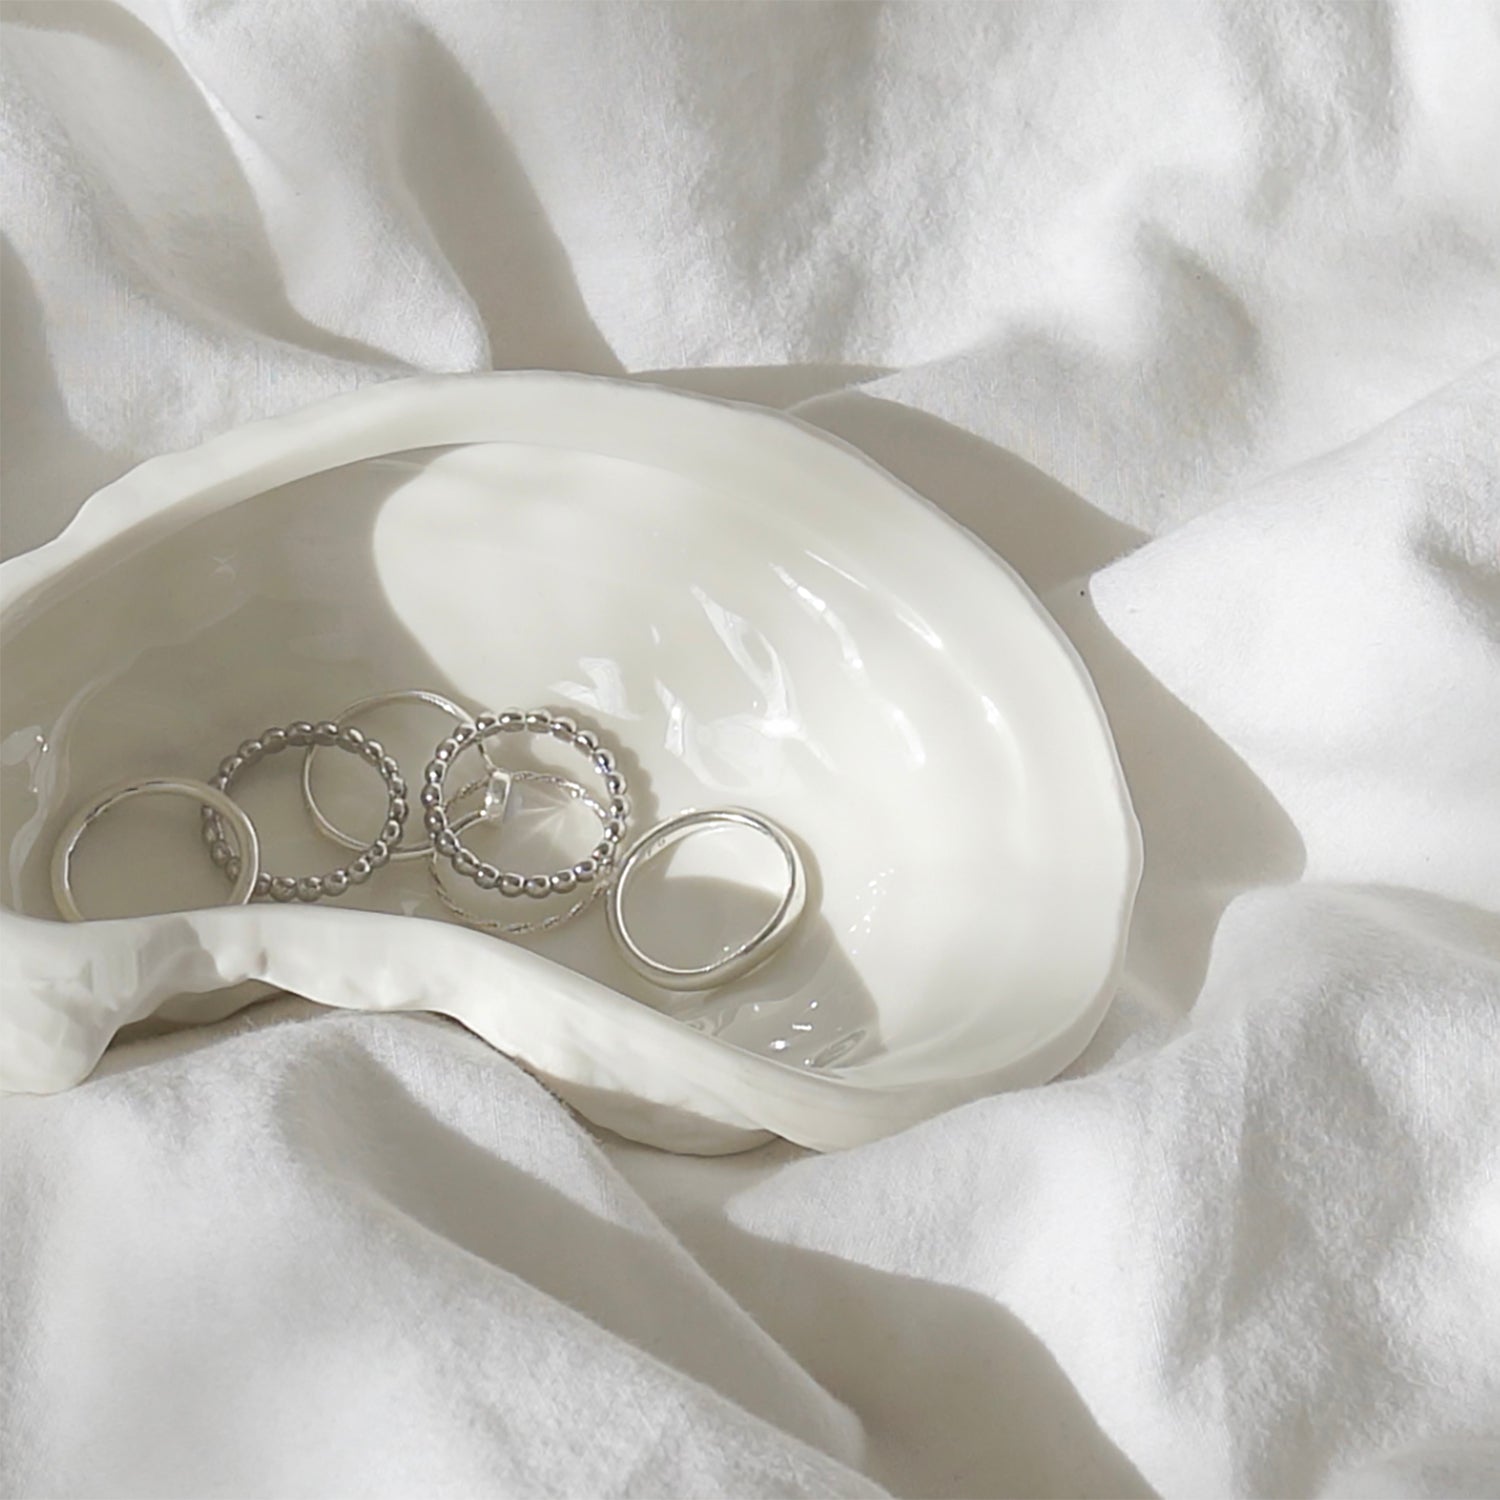 silver rings in a oyster shaped jewelry, trinket dish for perfect beach house aesthetic decor